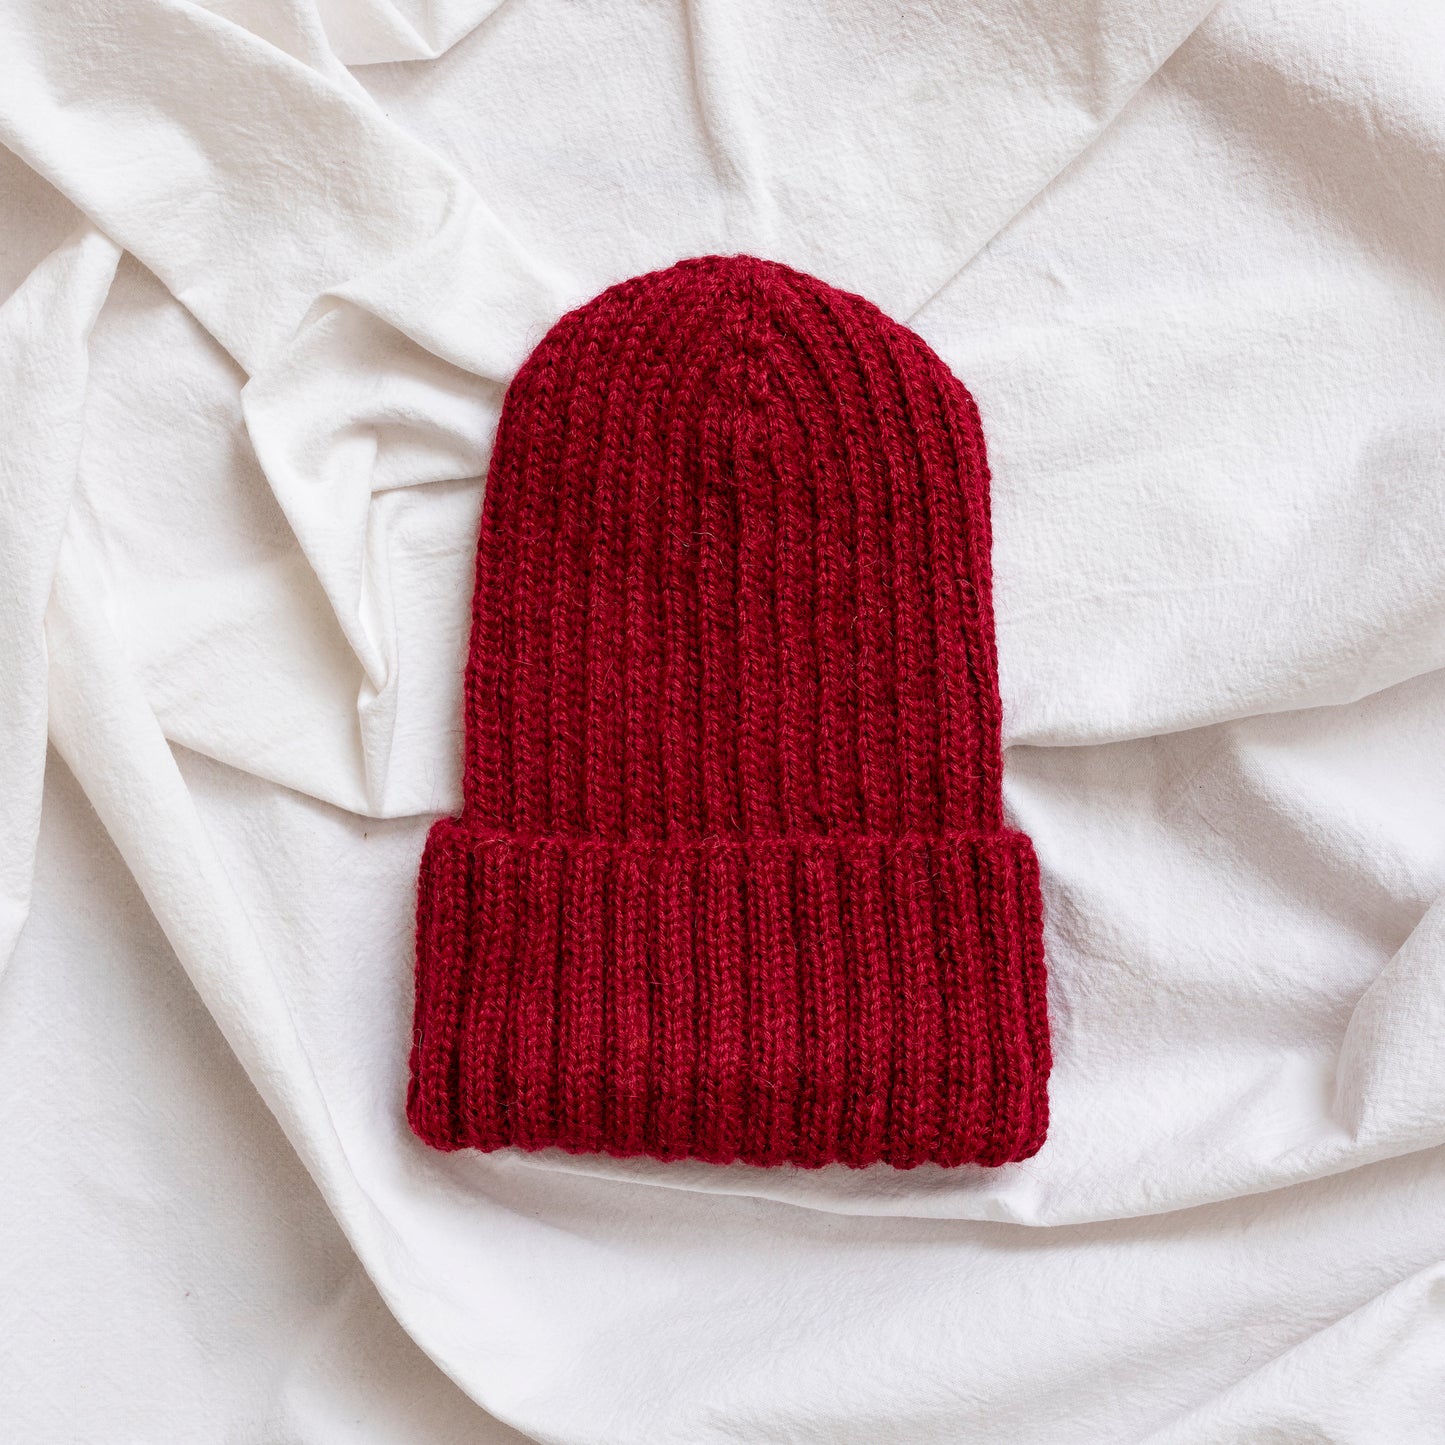 Burgundy coloured soft beanie with rib detail made from alpaca wool.